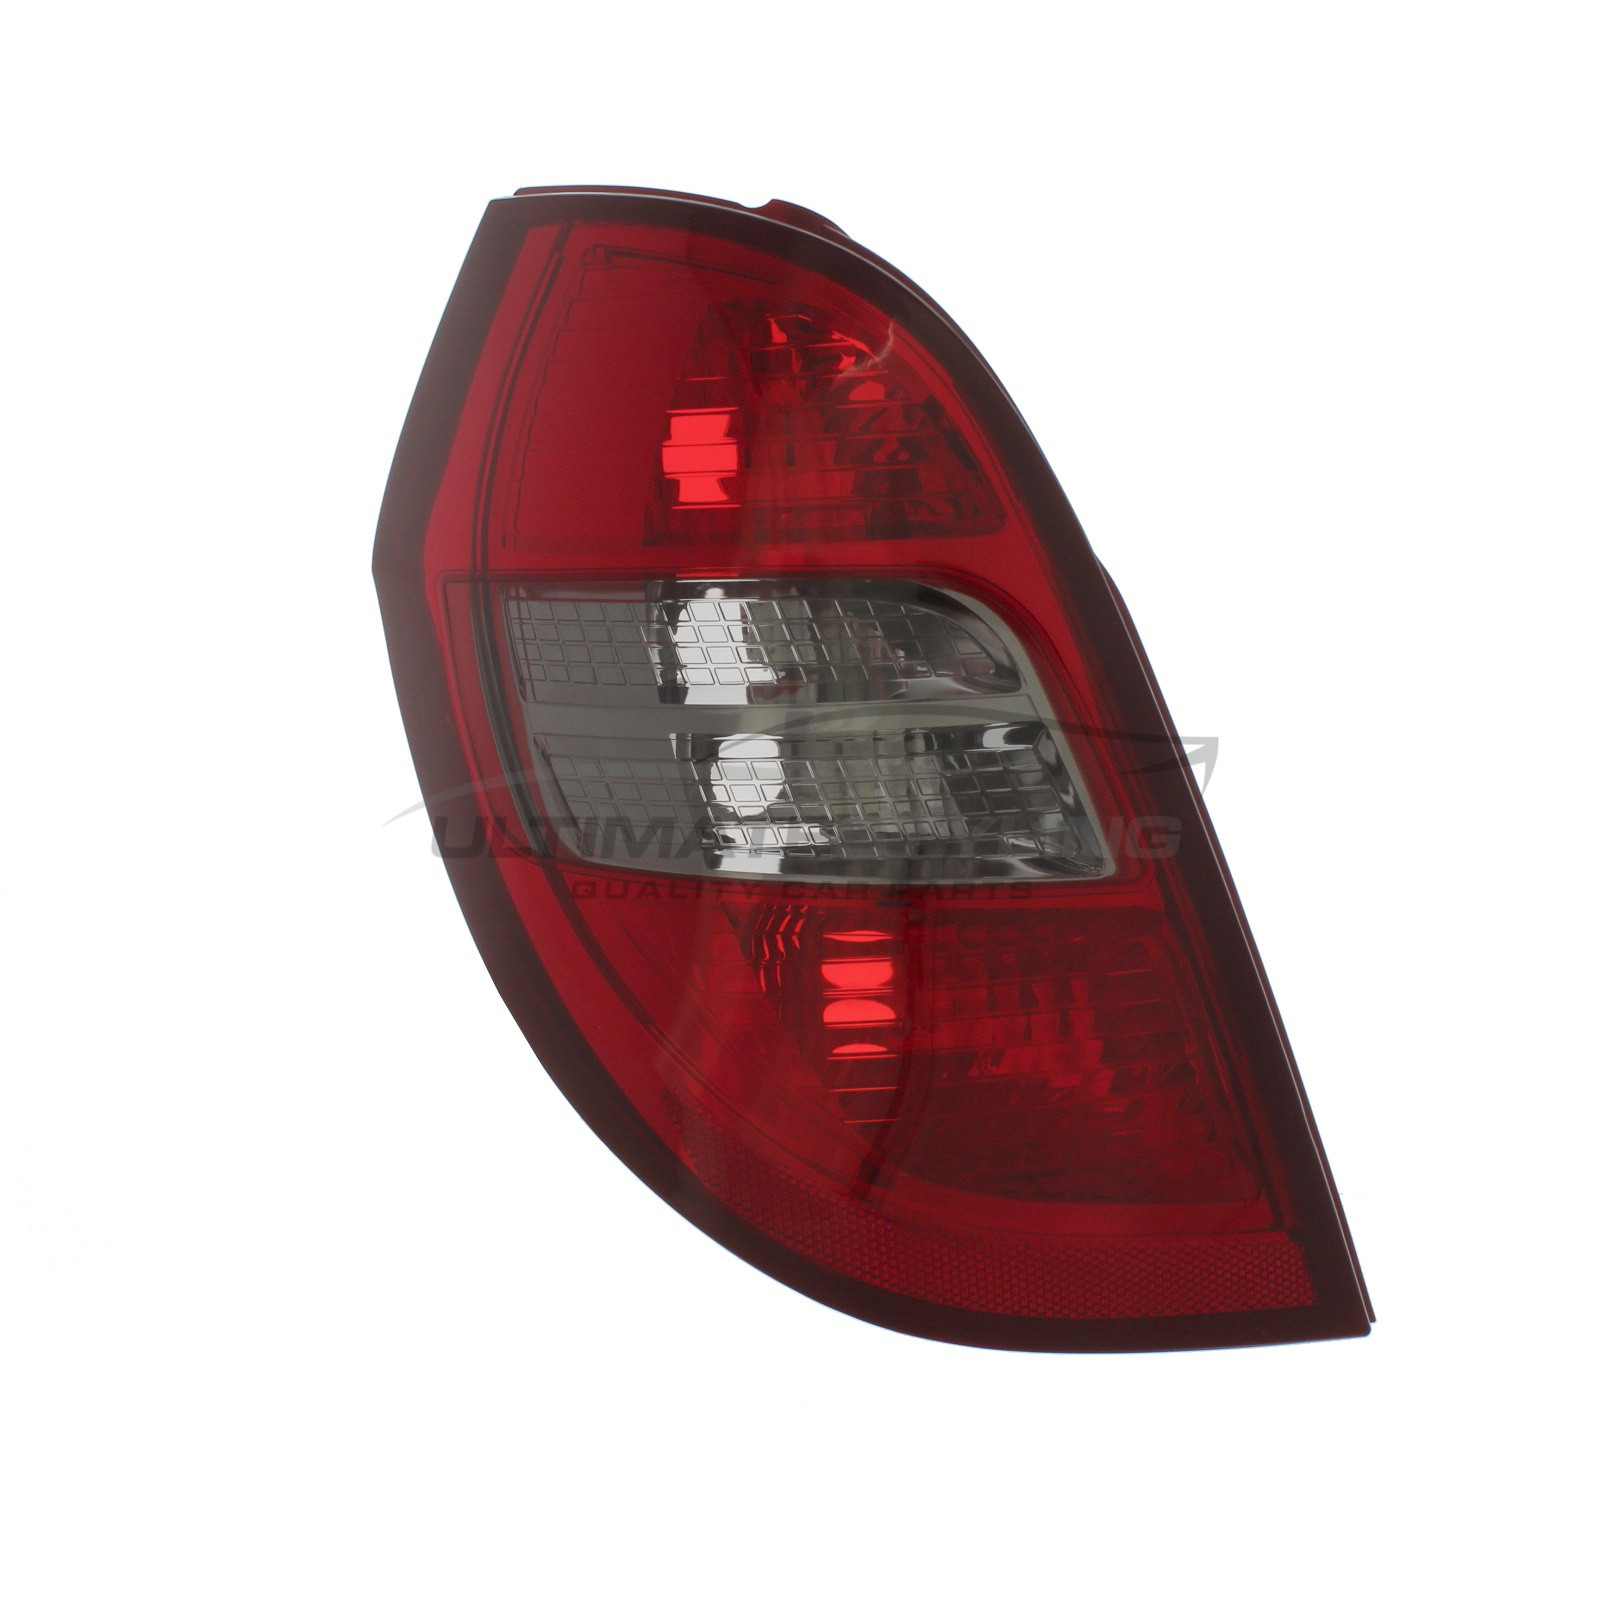 Mercedes Benz A Class 2008-2012 Non-LED with Smoked Indicator Rear Light / Tail Light Excluding Bulb Holder Passenger Side (LH)